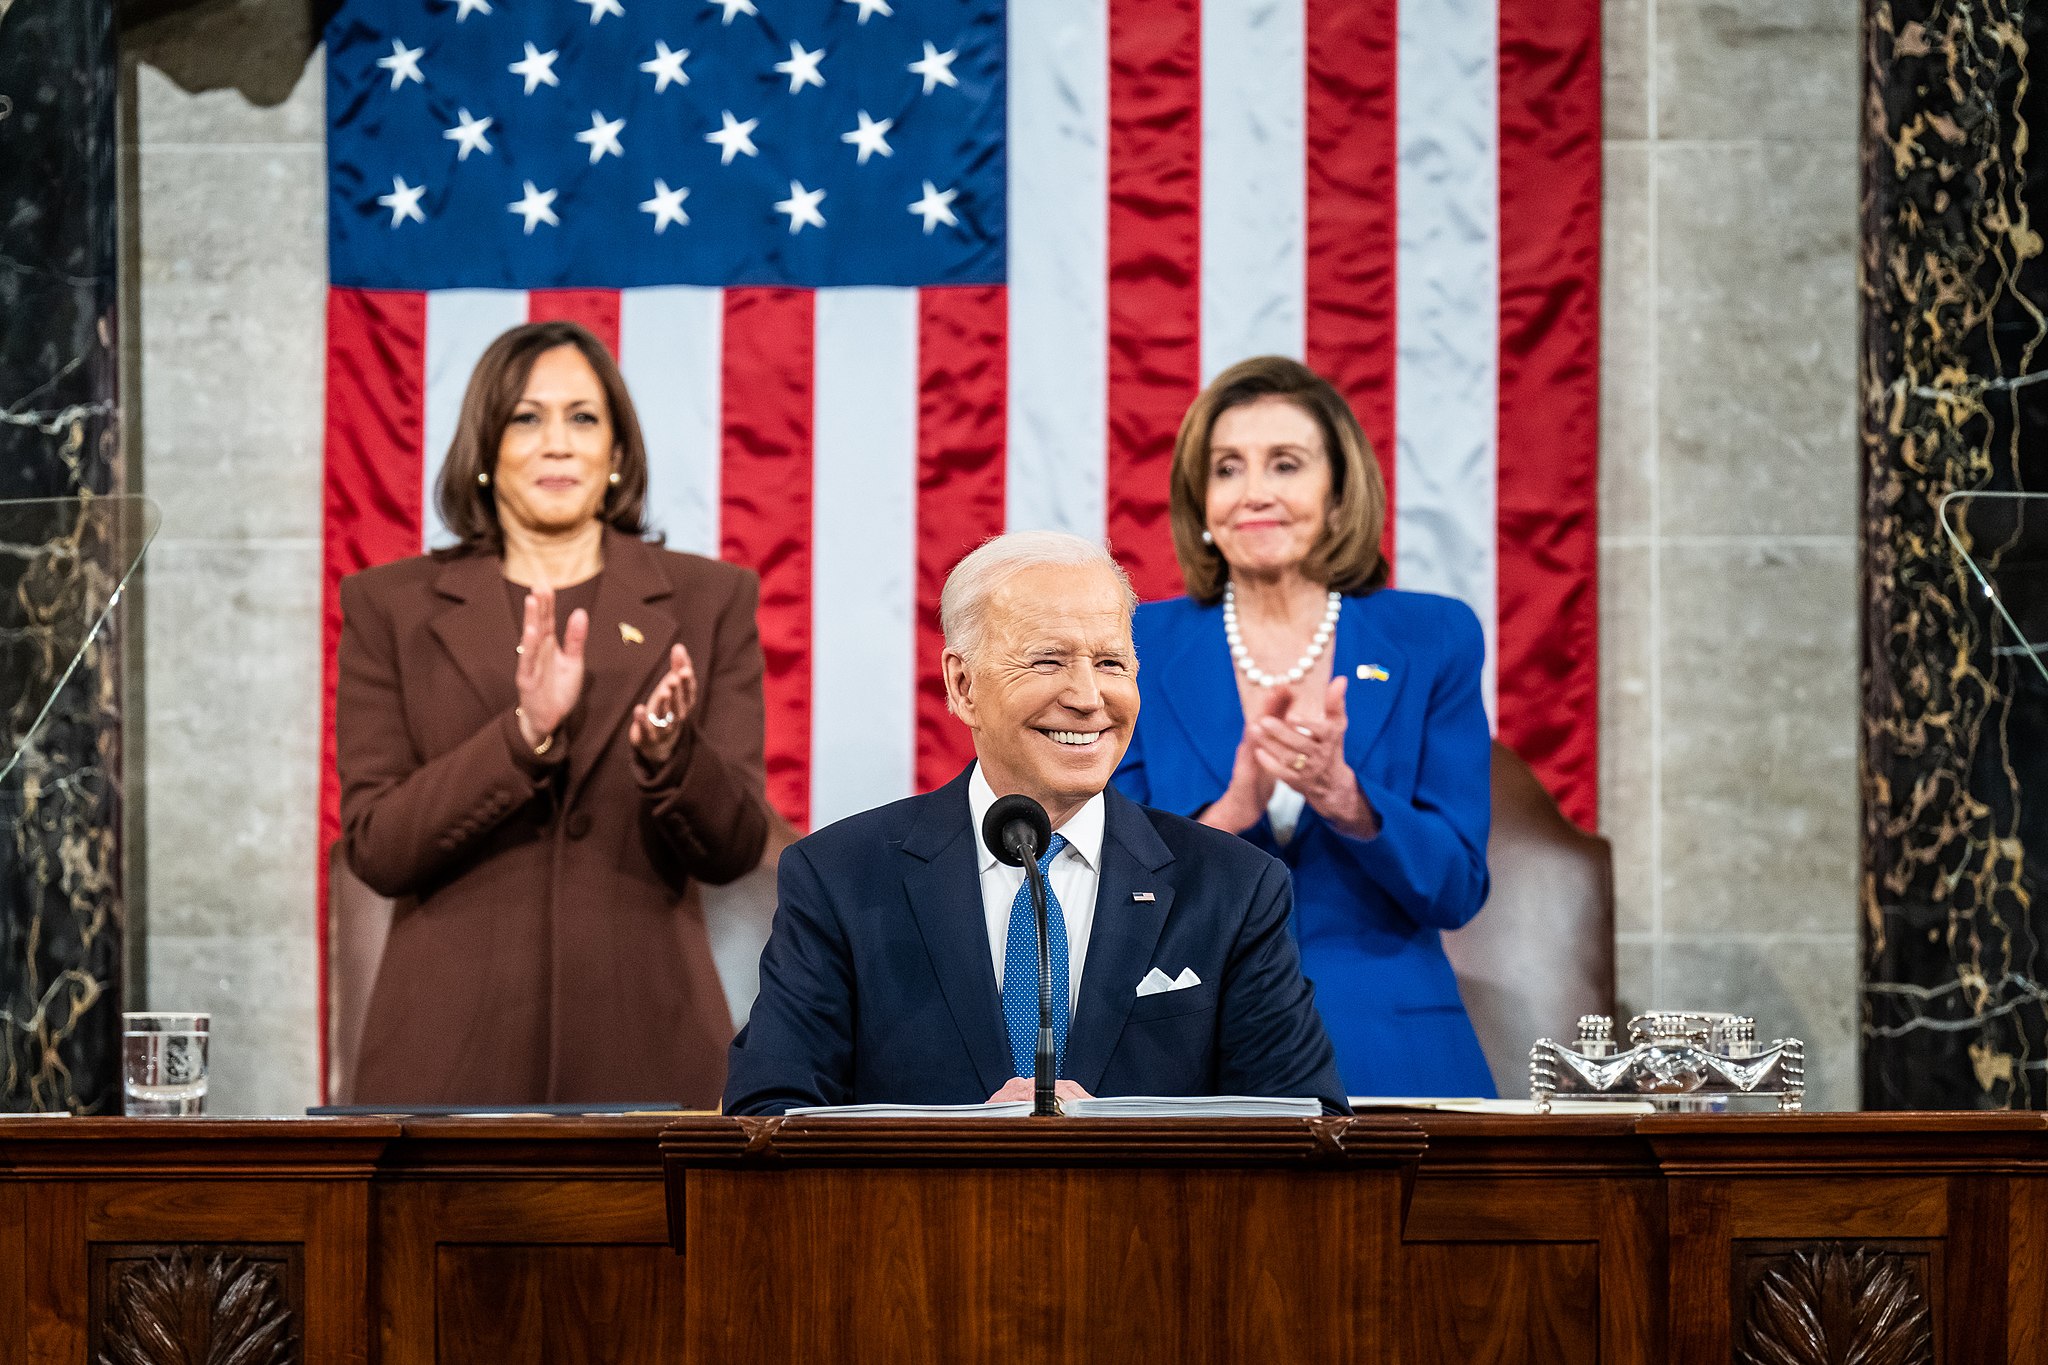 President Biden speaks at the state of the union address. Vice President Kamala Harris and Nancy Pelosi stand behind him while clapping. An American flag hangs on the wall behind them